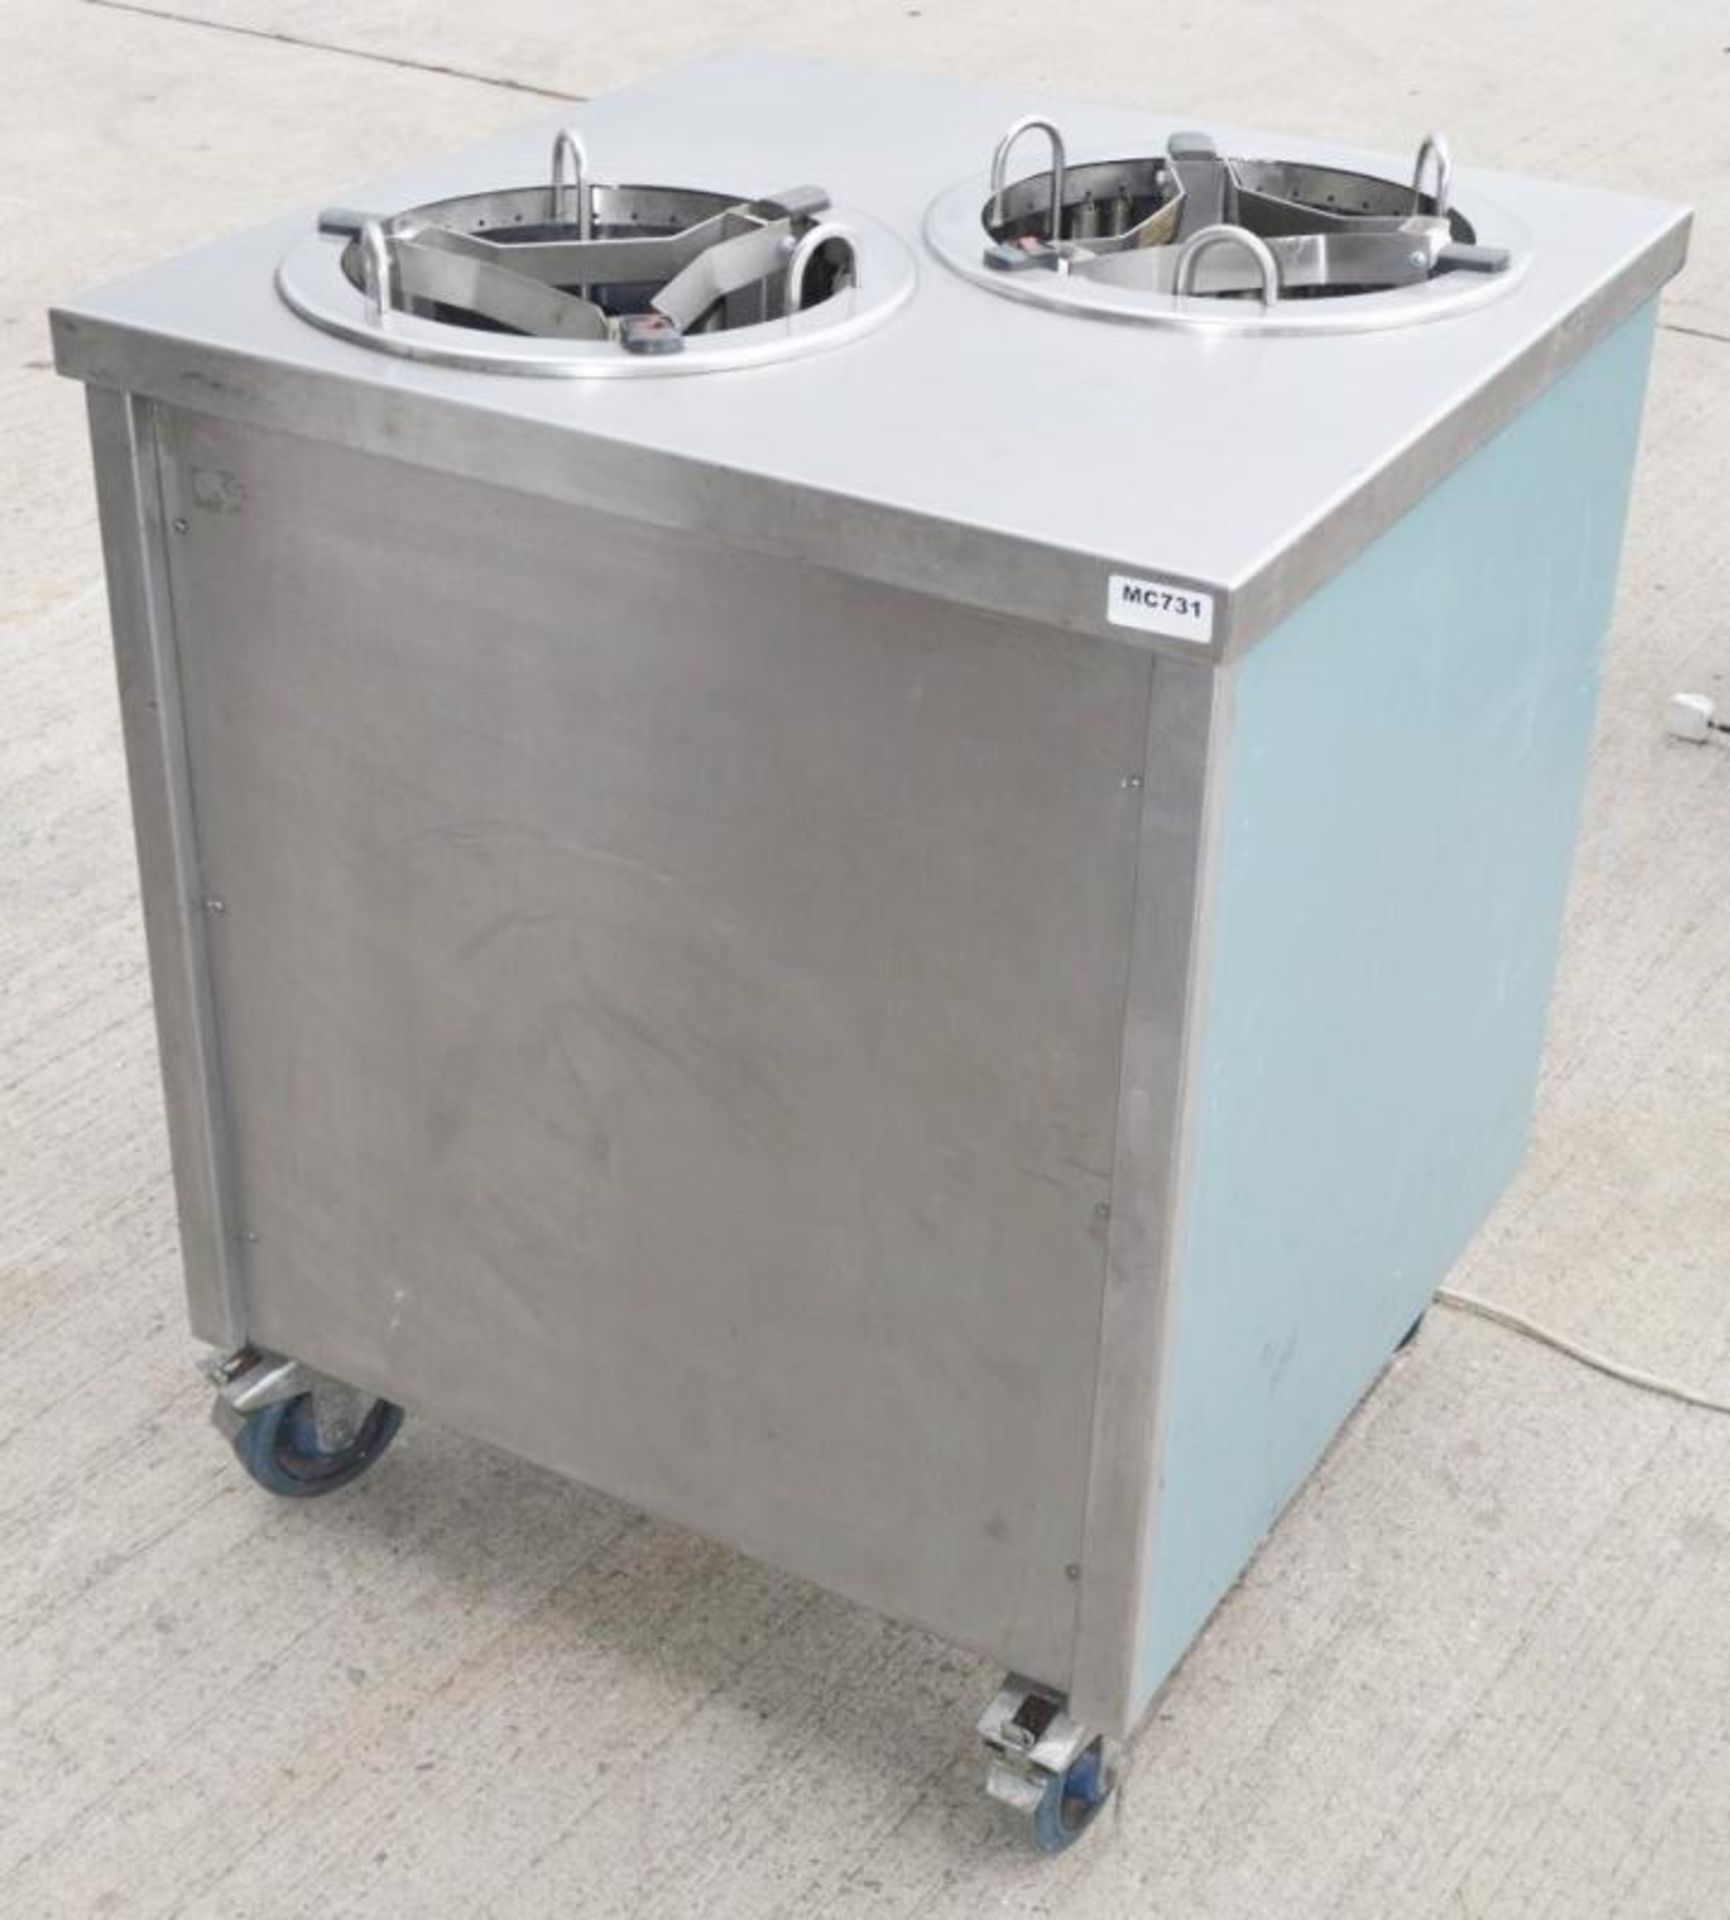 1 x Stainless Steel Double Heated Plate Warmer - Dimensions: W70 x D70 x H87cm - Removed From A Comm